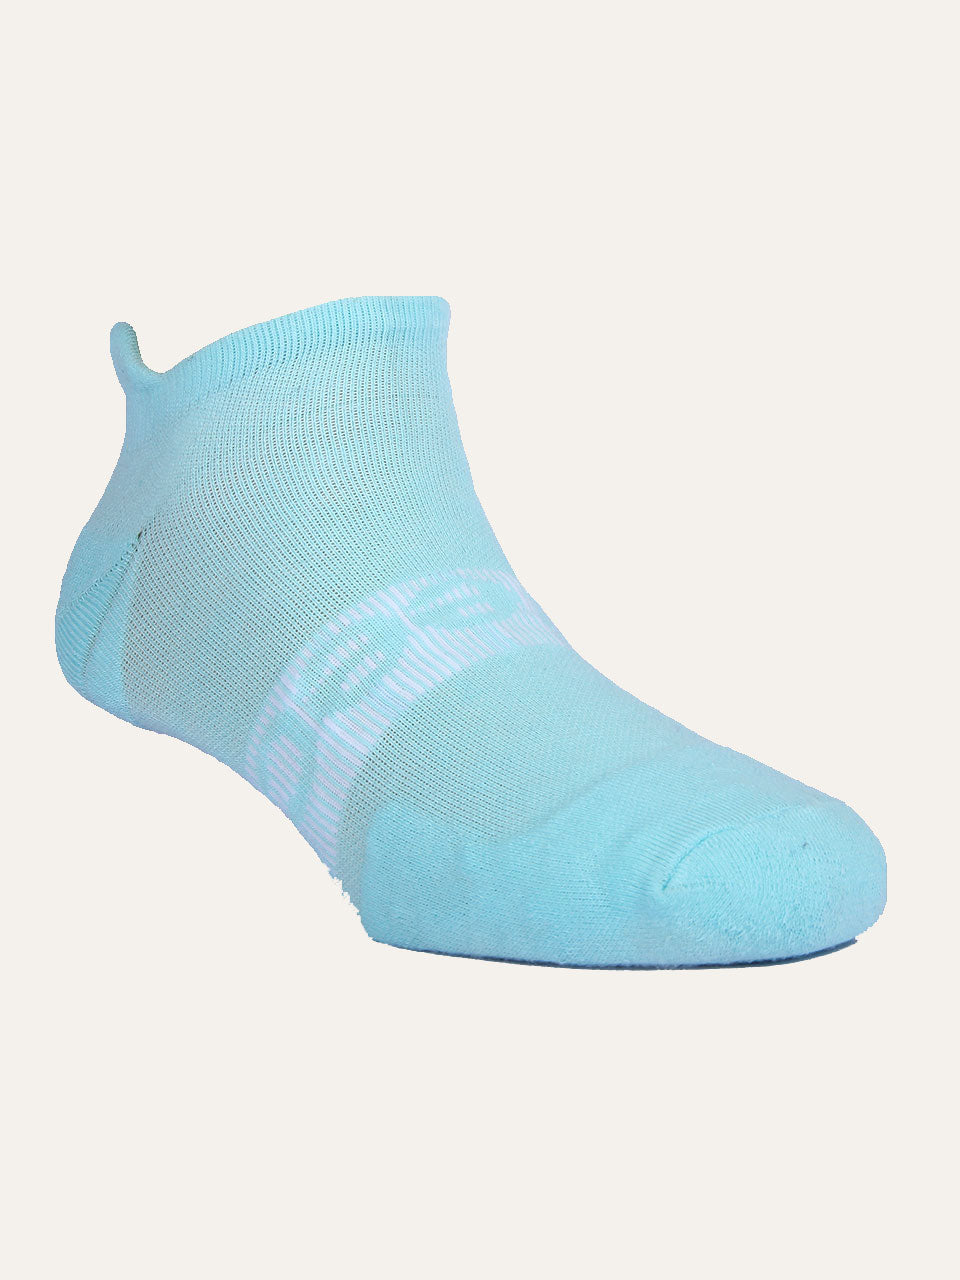 Bamboo Active Socks - Pack of 1